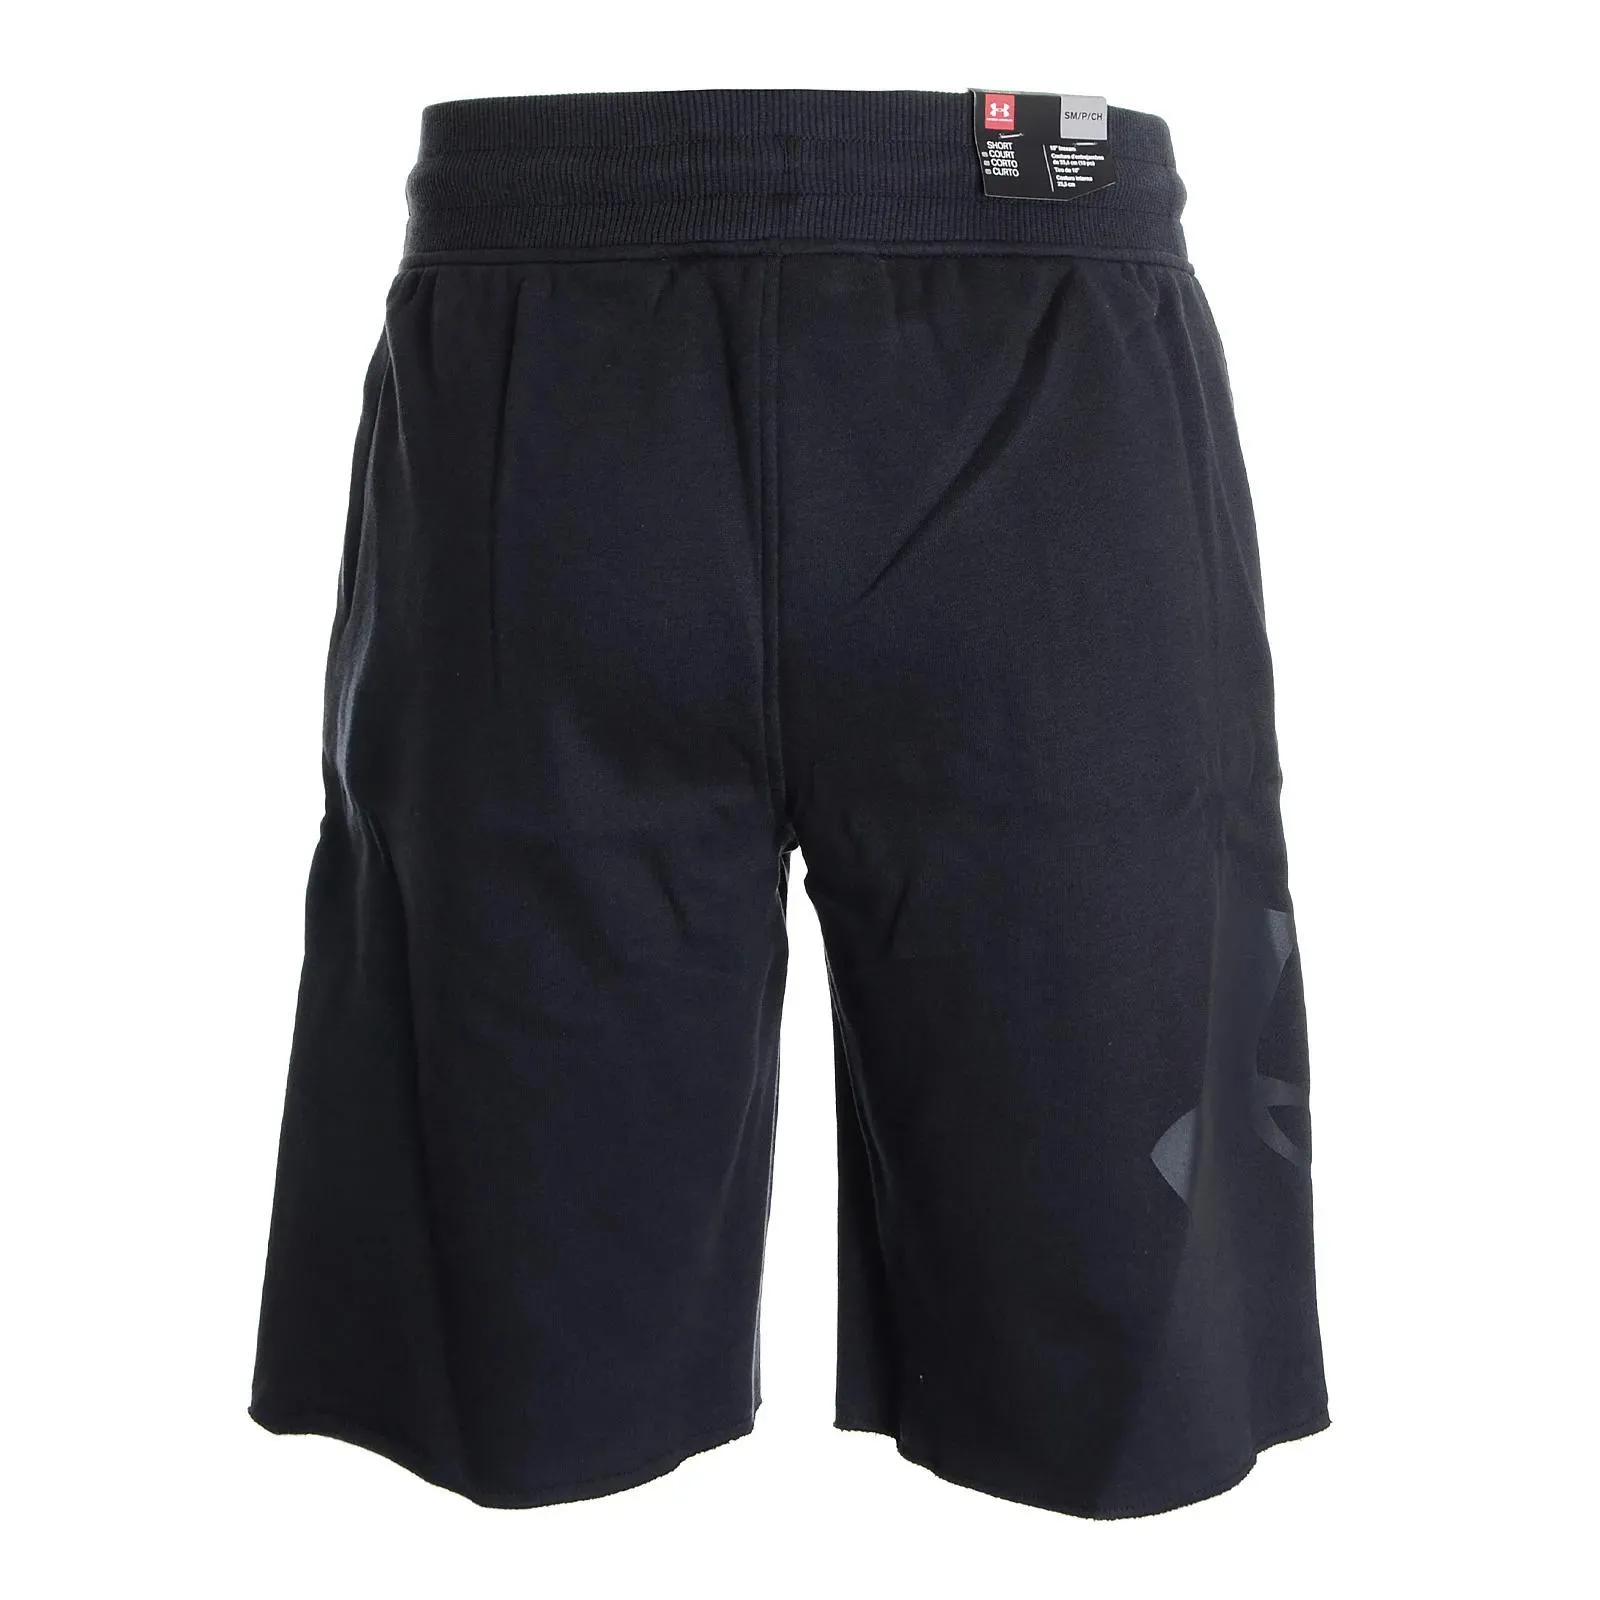 Under Armour RIVAL EXPLODED GRAPHIC SHORT 